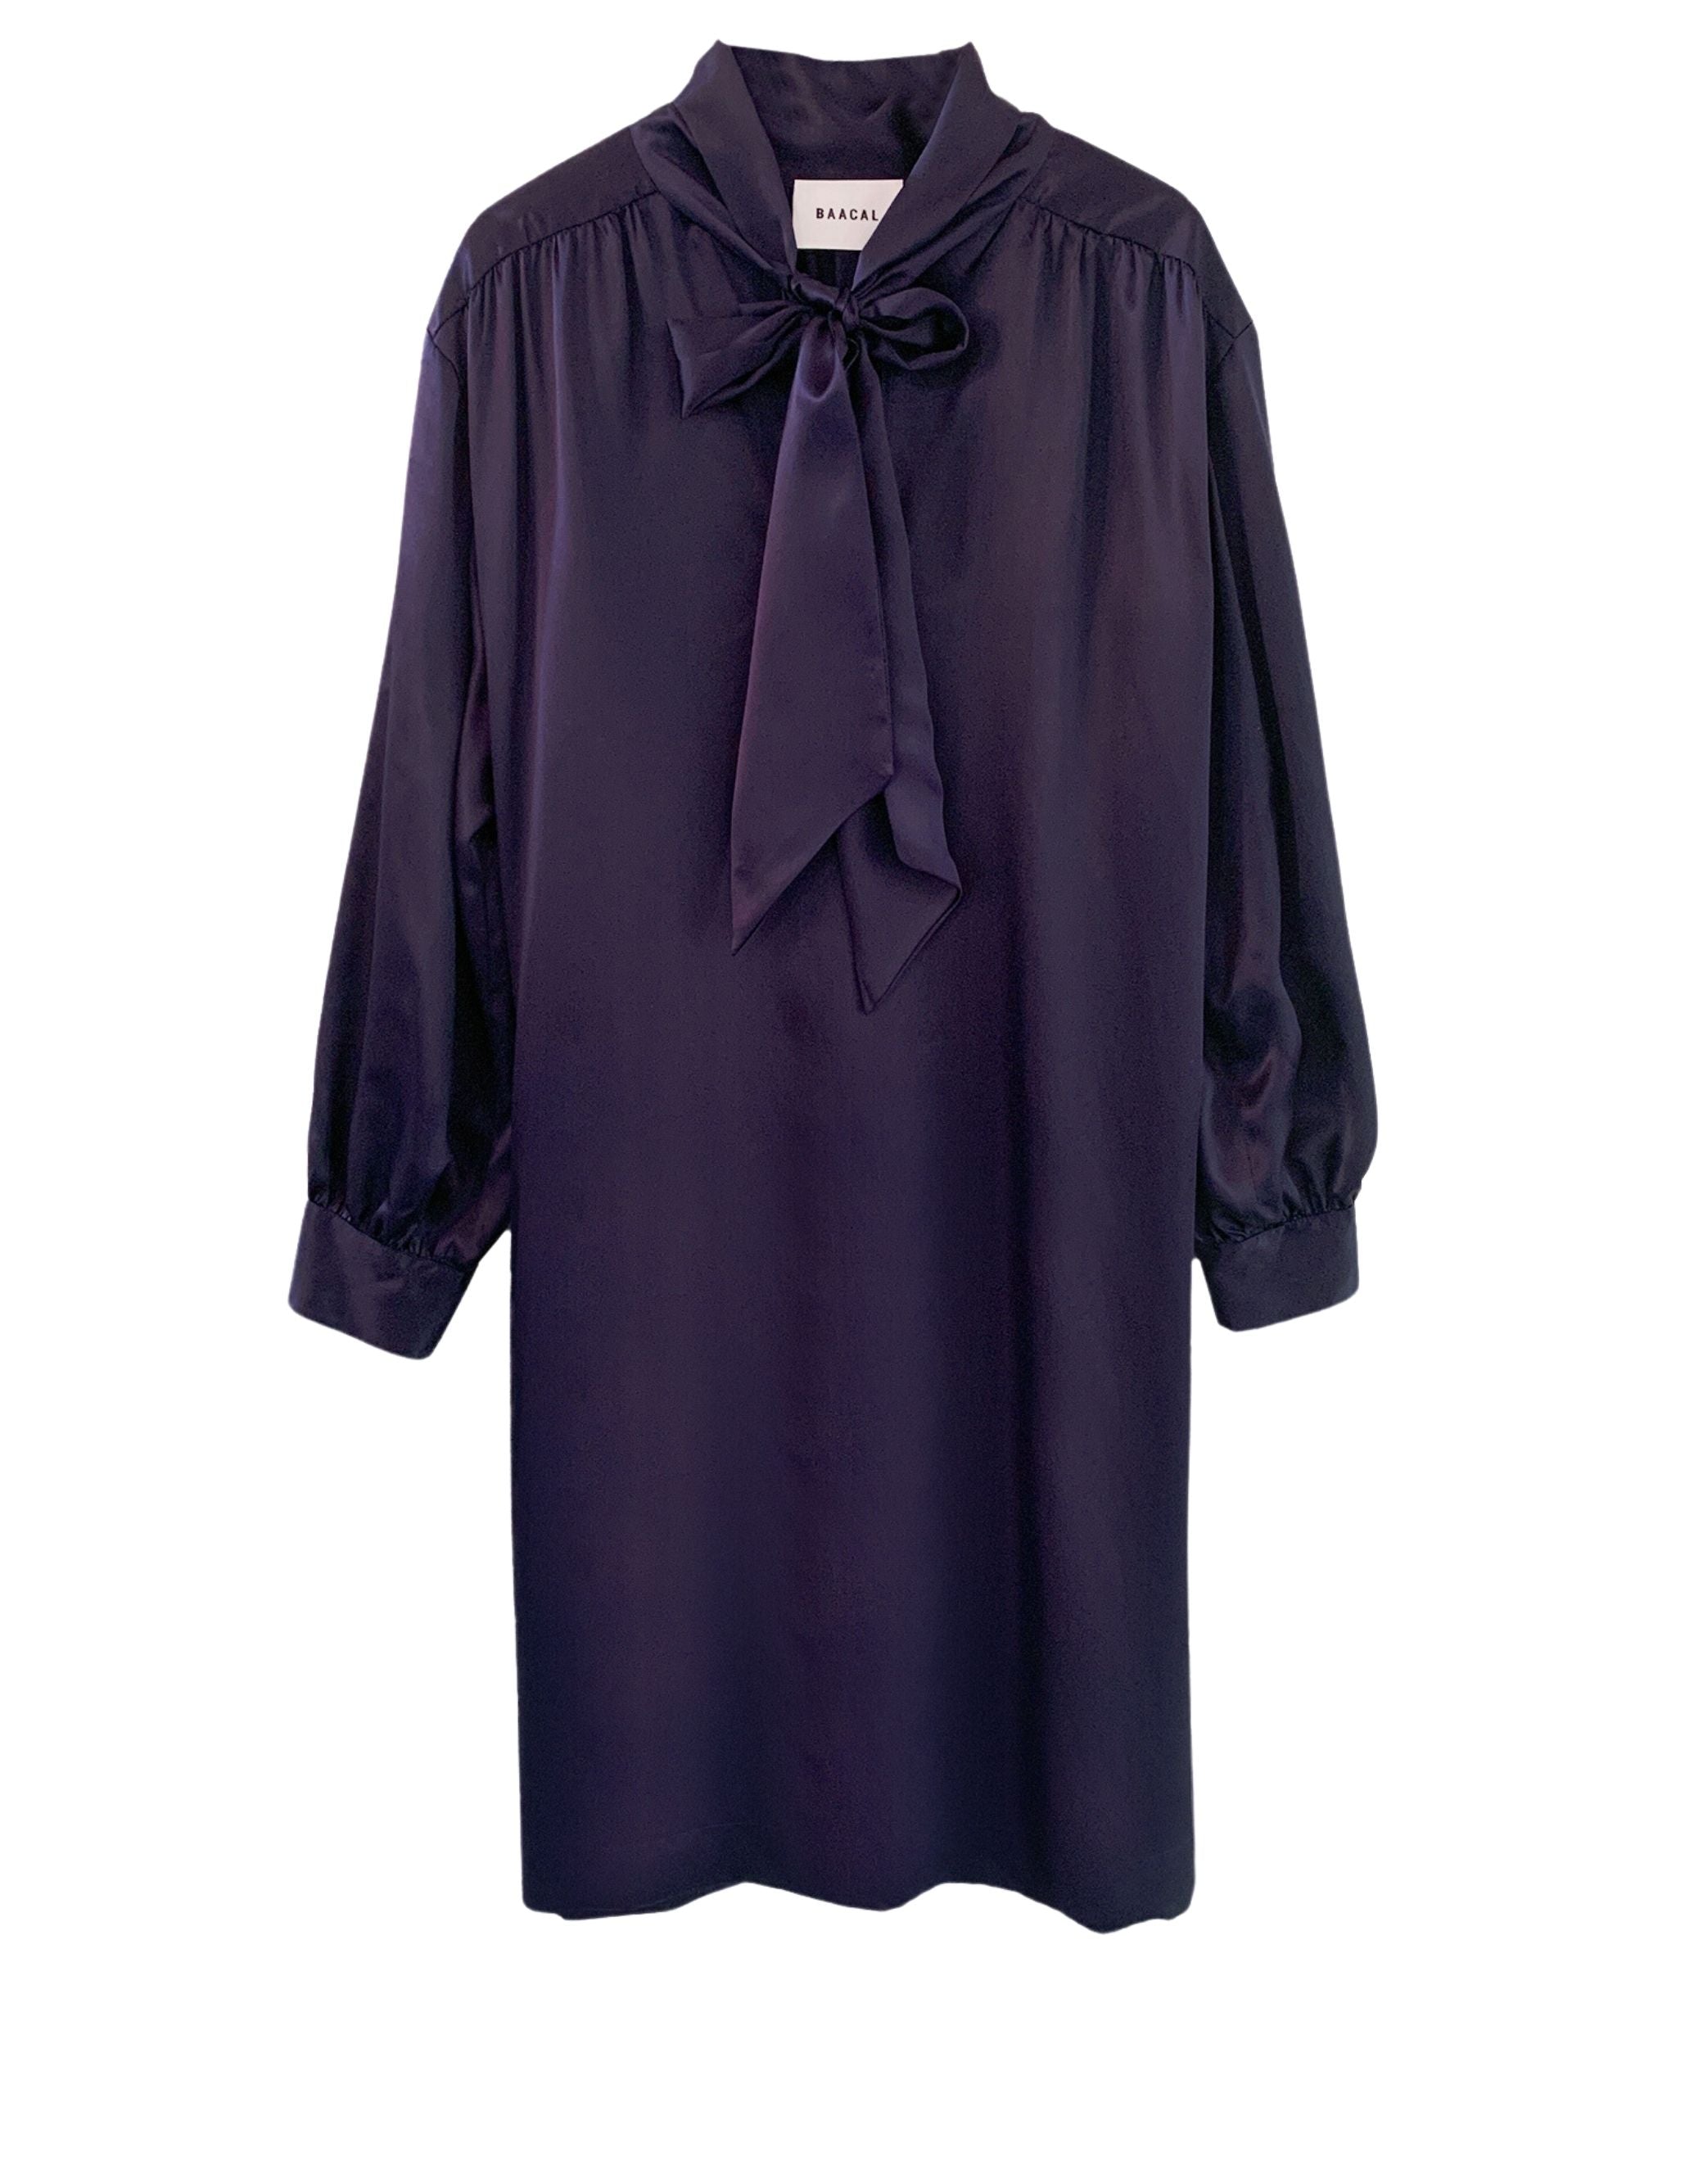 Marion Dress in Eggplant